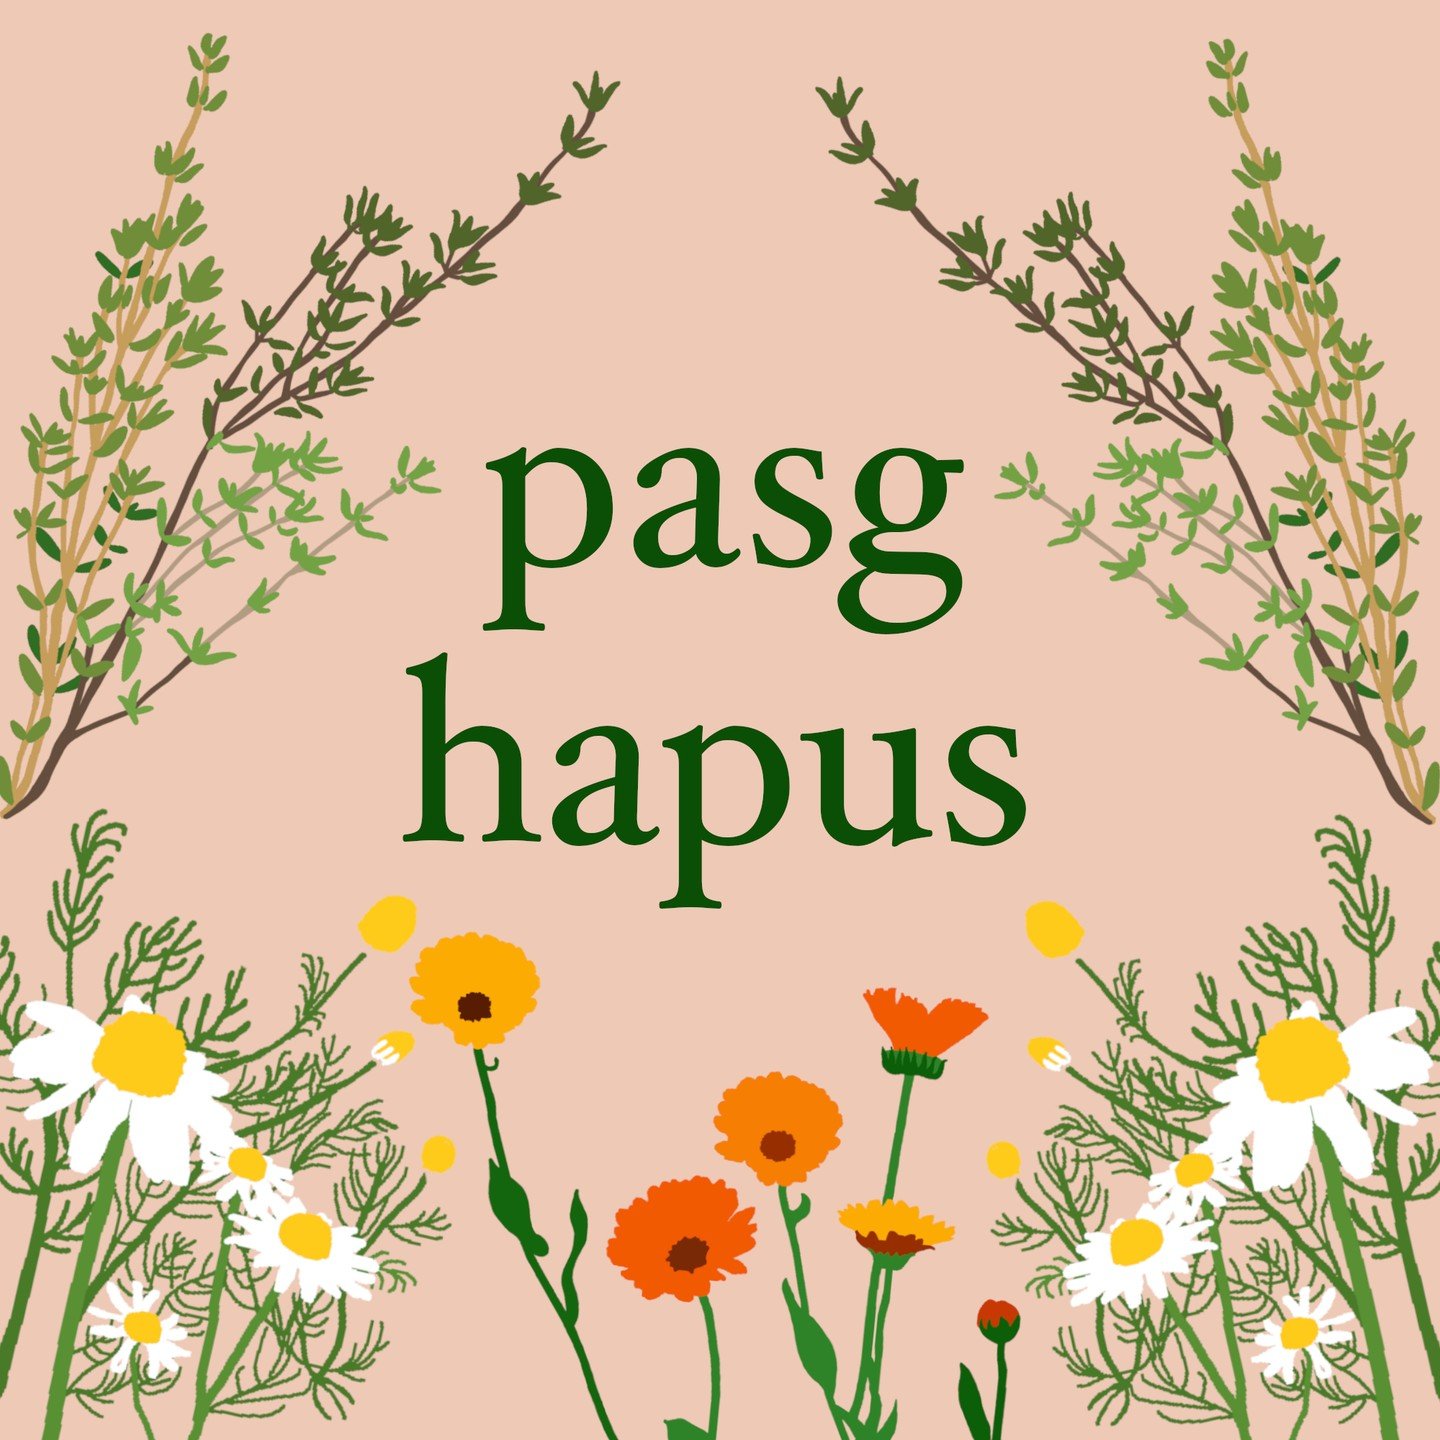 Pasg Hapus! Happy Easter. Hope you've had a lovely weekend. We had some beautiful weather here in Haverfordwest so I was mostly in the garden making plans for the herb beds this spring.

The business is off to a great start this year as we're stockin